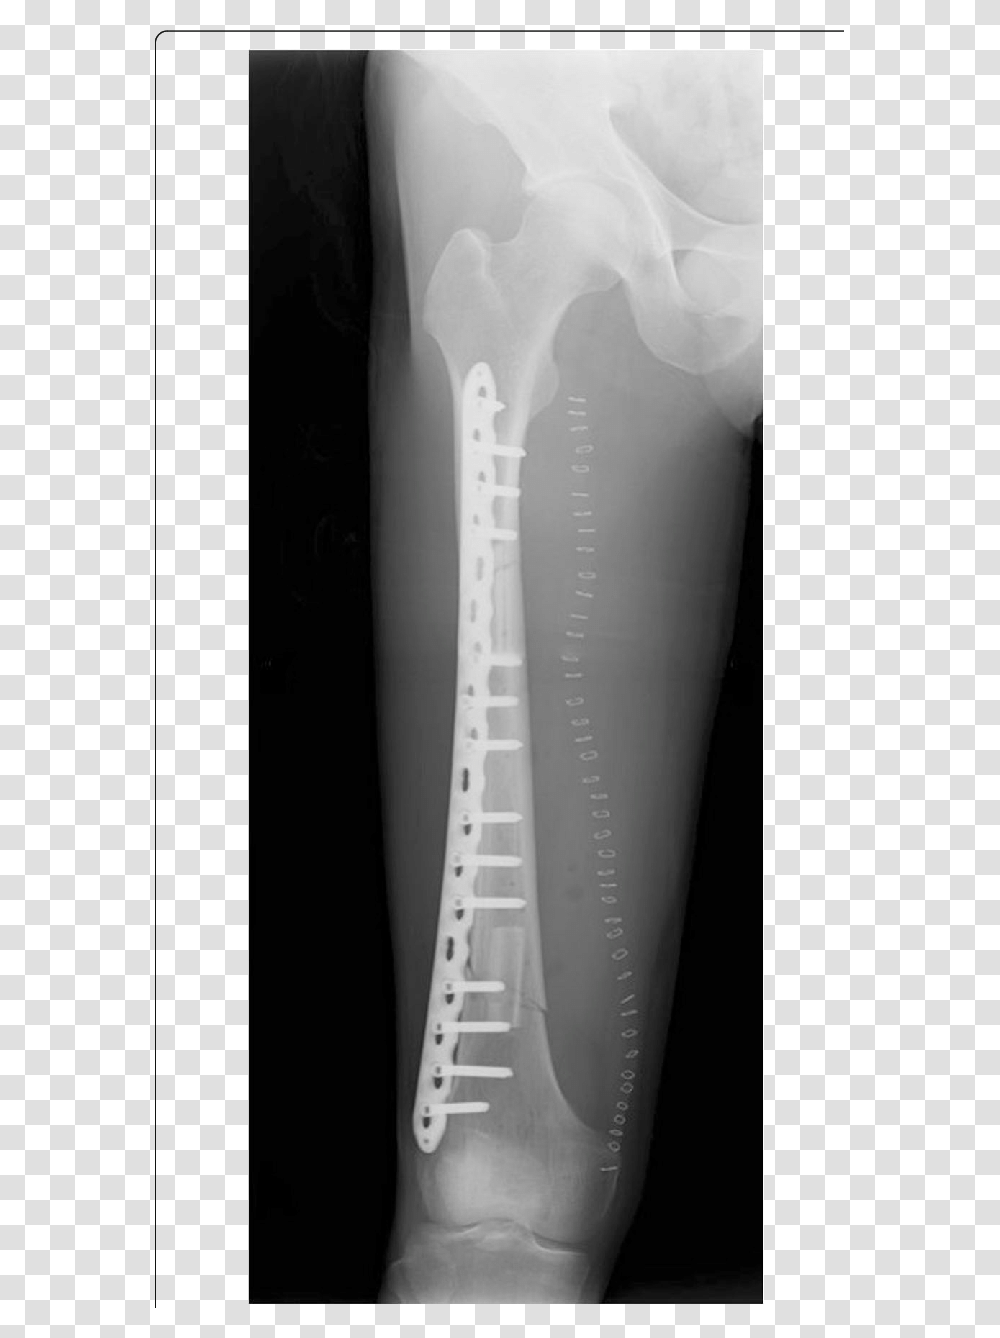 Postoperative Radiography After The Femur Reconstruction X Ray, X-Ray, Ct Scan, Medical Imaging X-Ray Film Transparent Png